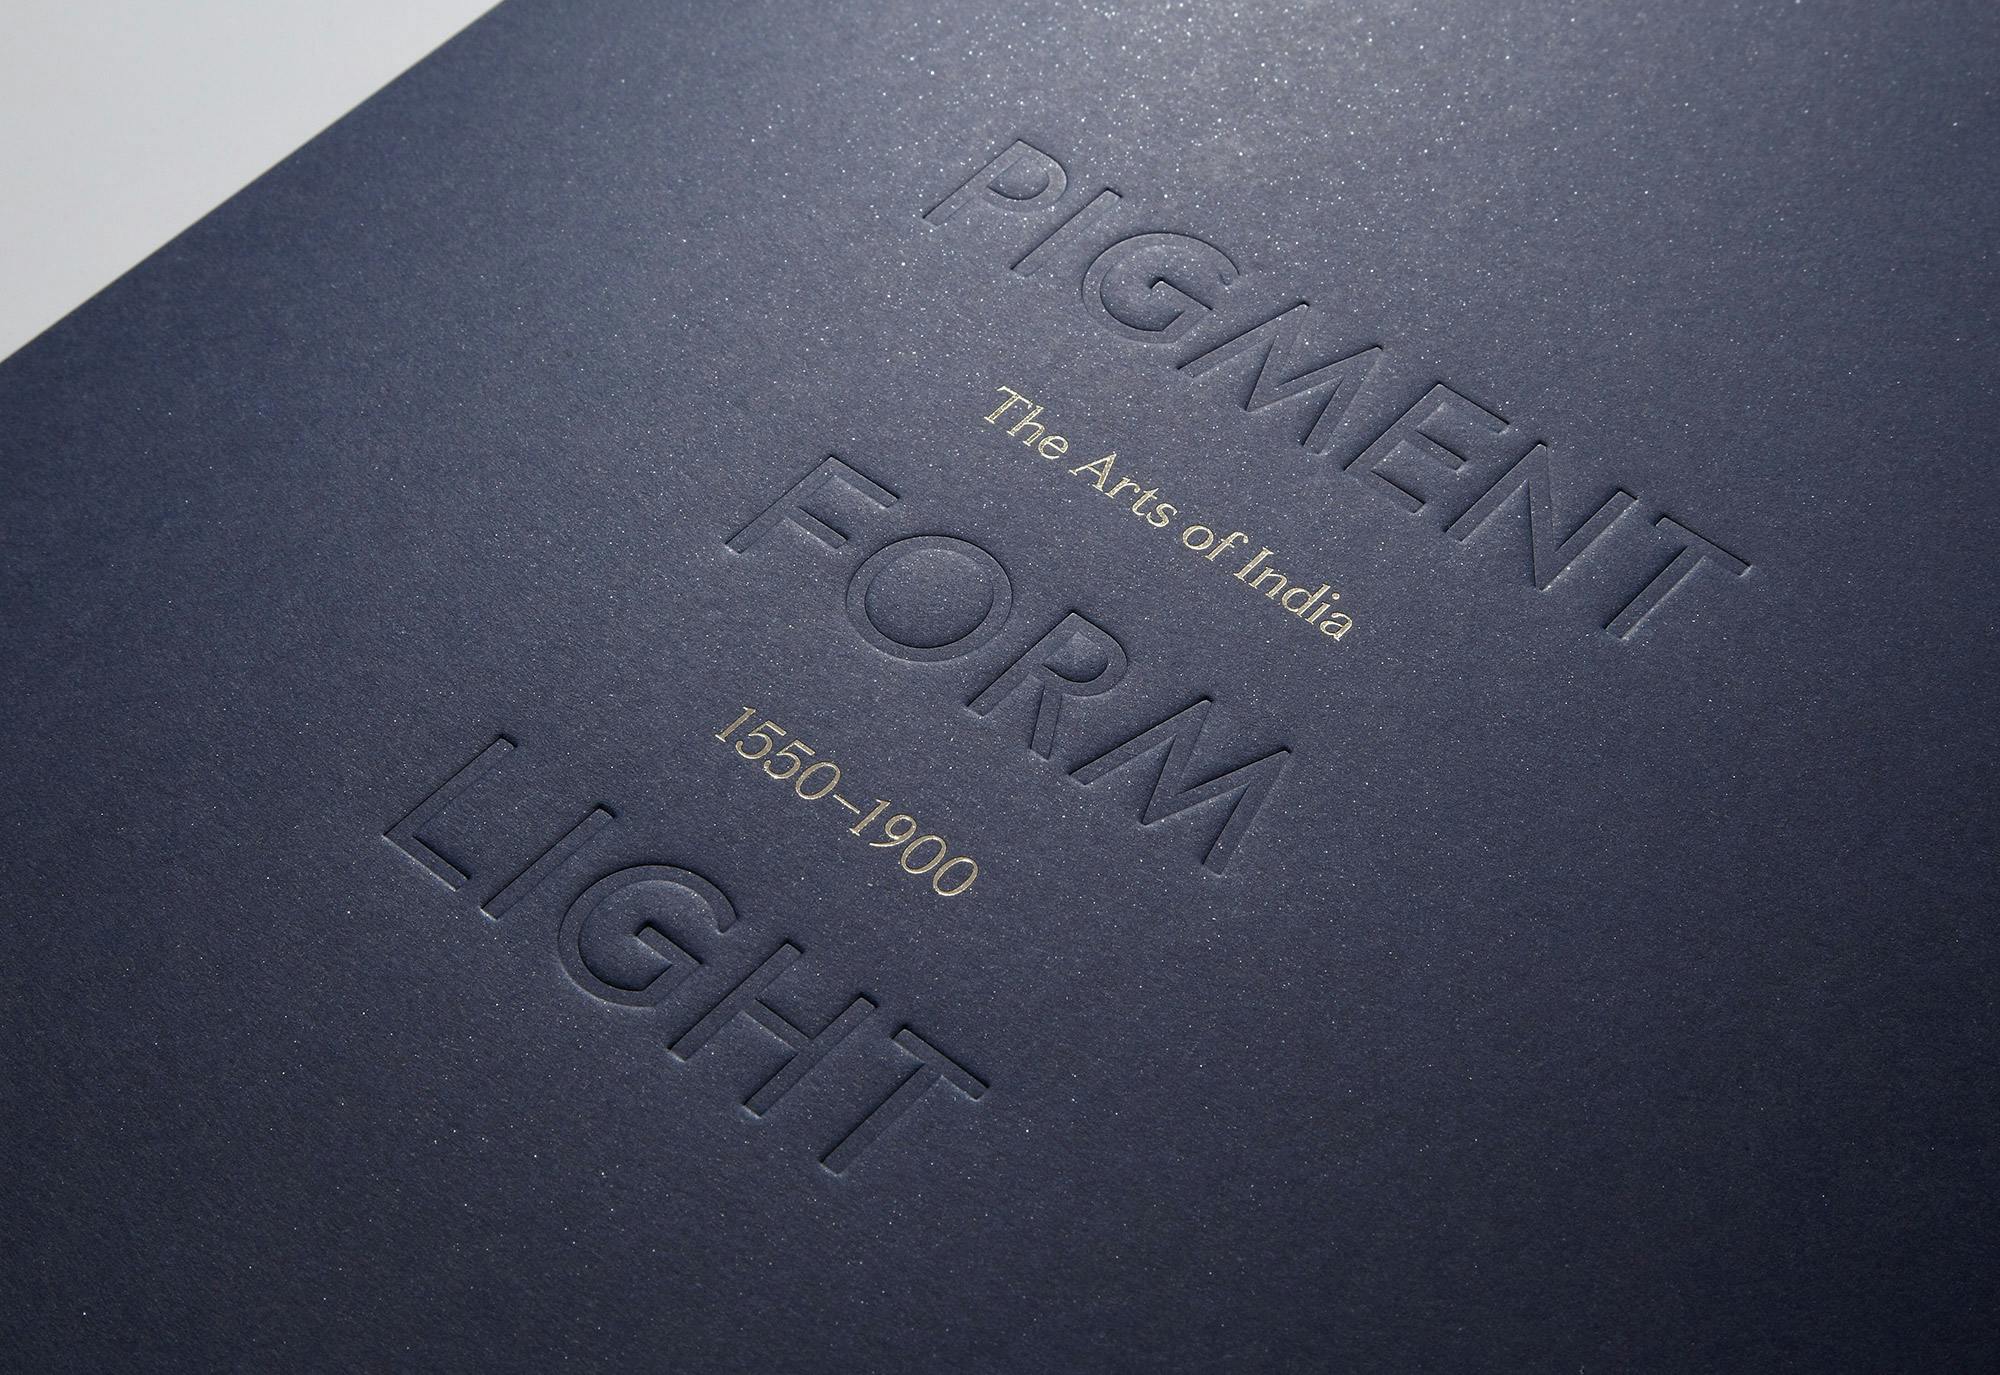 Exhibition Catalogue designed by Extract Studio